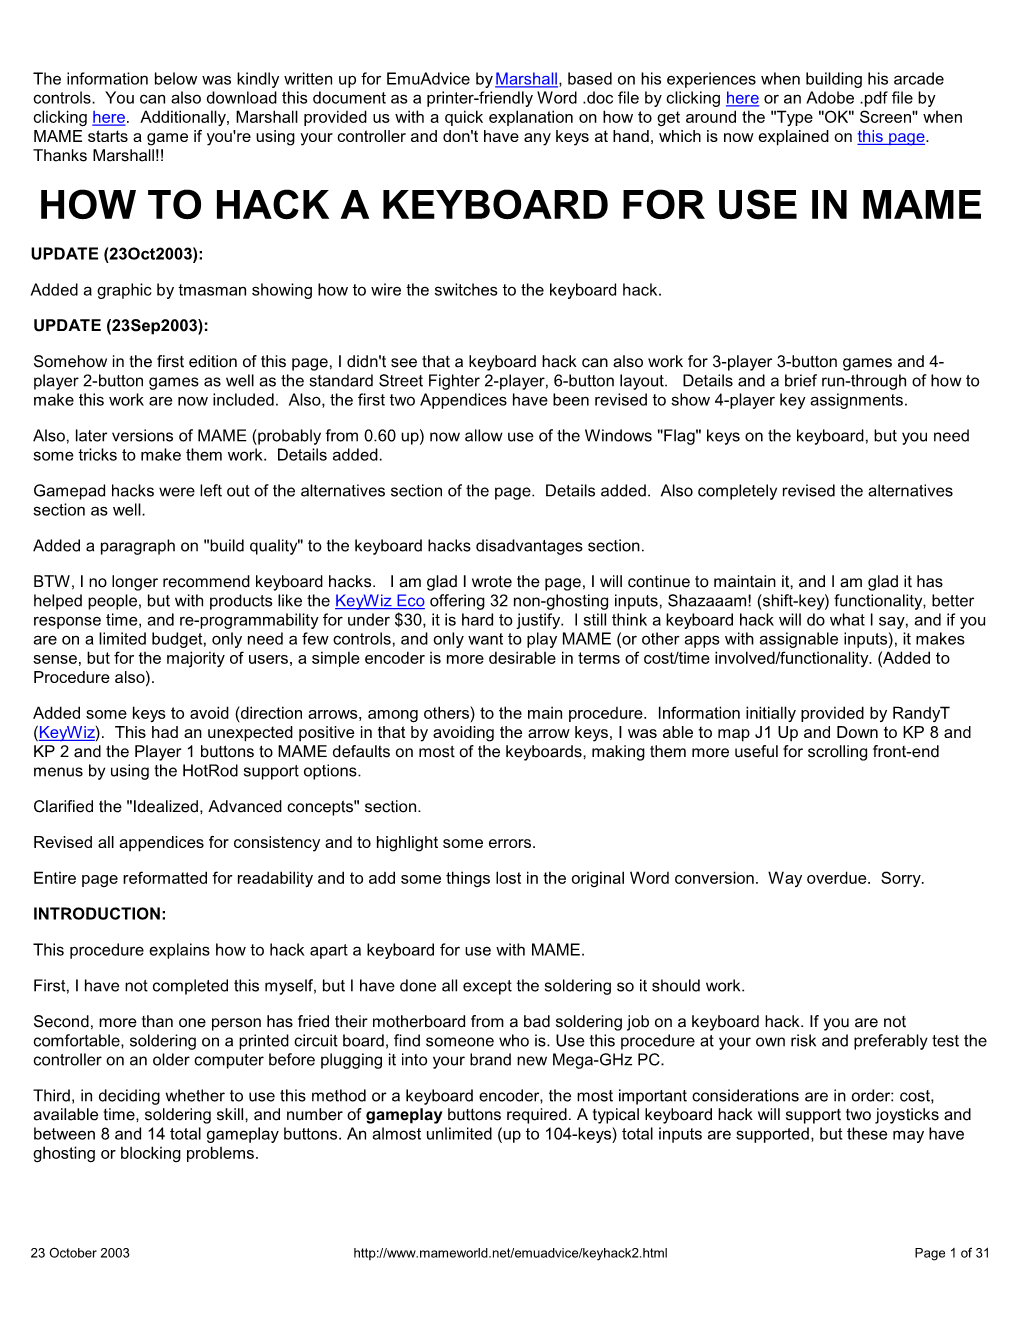 How to Hack a Keyboard for Use in Mame